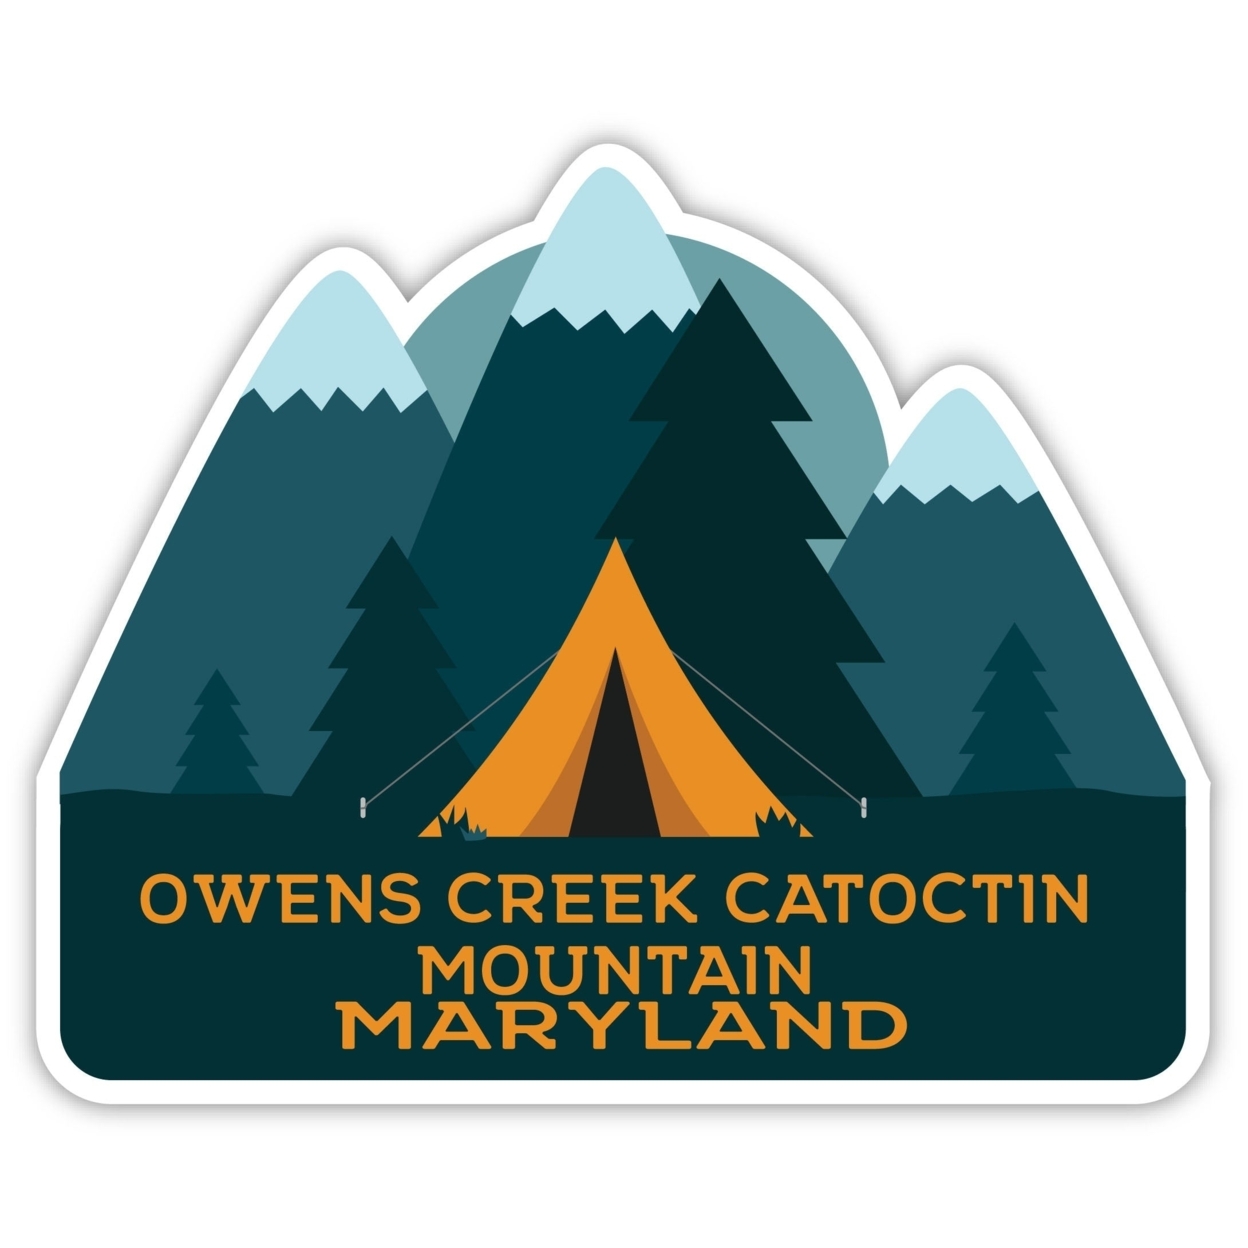 Owens Creek Catoctin Mountain Maryland Souvenir Decorative Stickers (Choose Theme And Size) - Single Unit, 4-Inch, Tent